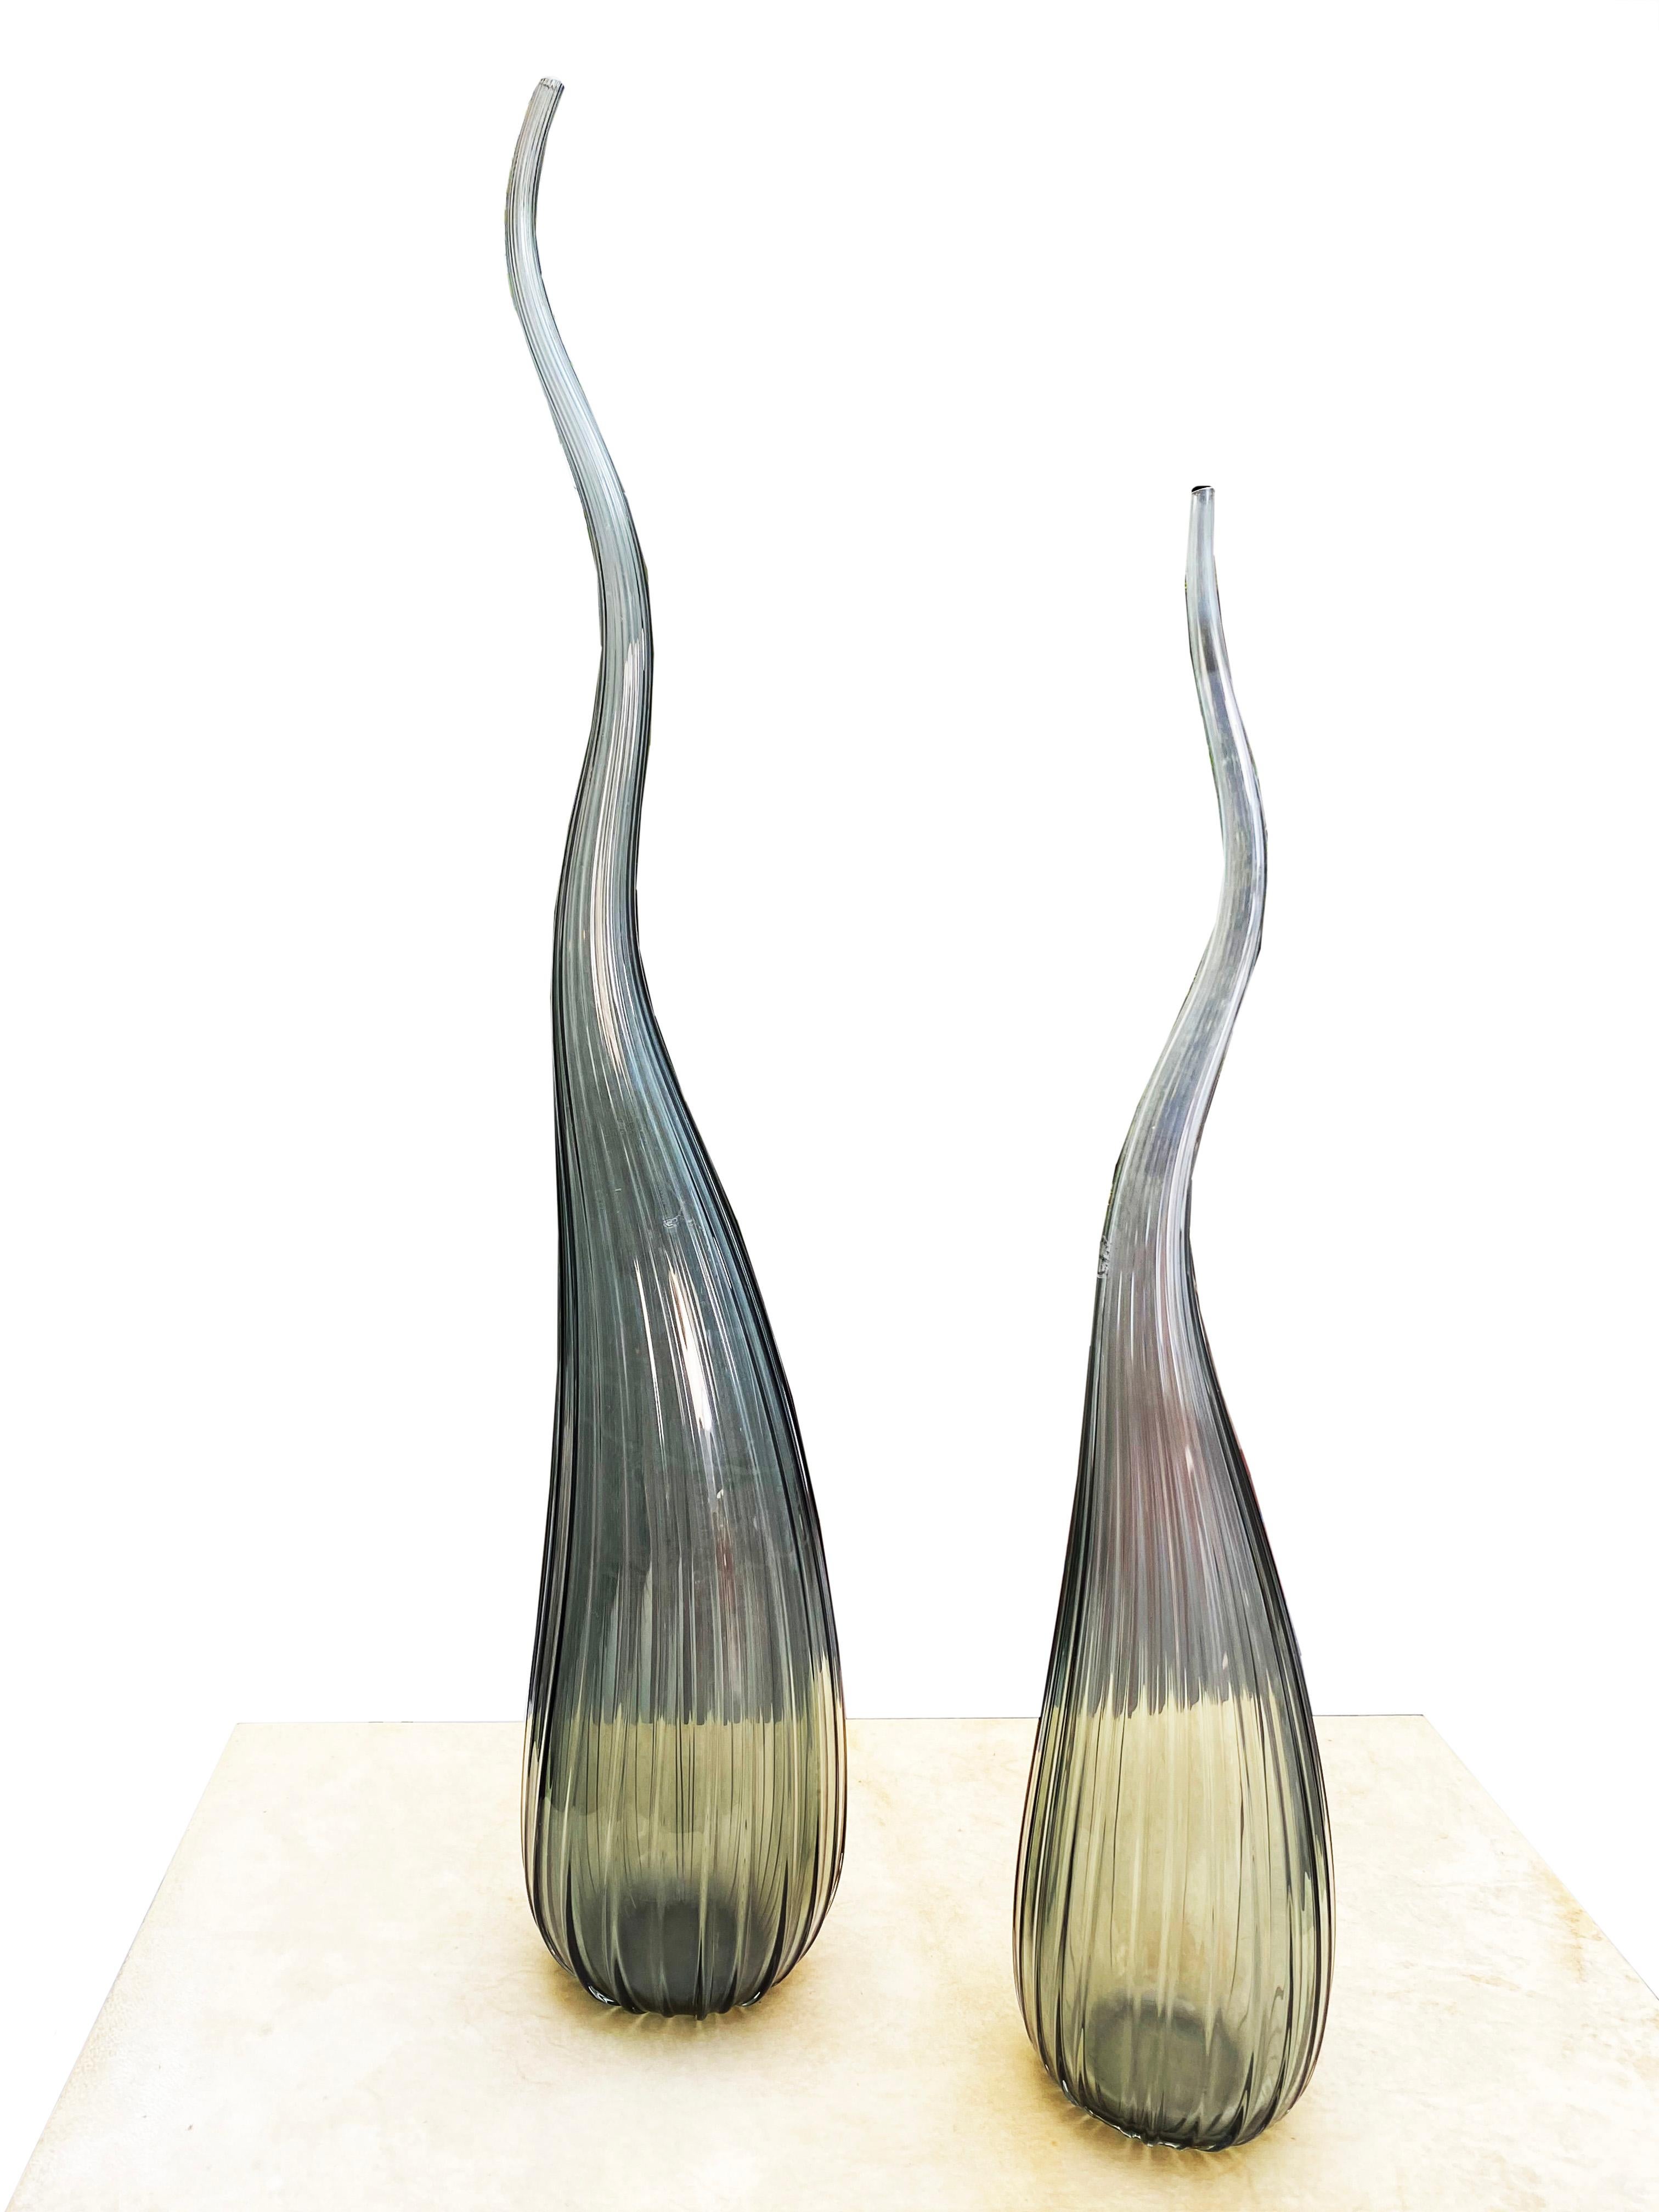 Salviati Murano
by Renzo Stellon
Aria model
2 soliflore vases model Aria
in smoked grey Murano glass
piriform in shape with a long, turbulent neck decorated with fine ribs
signed and dated 2009
1 of 55cms high
1 of 62 cms high
stock